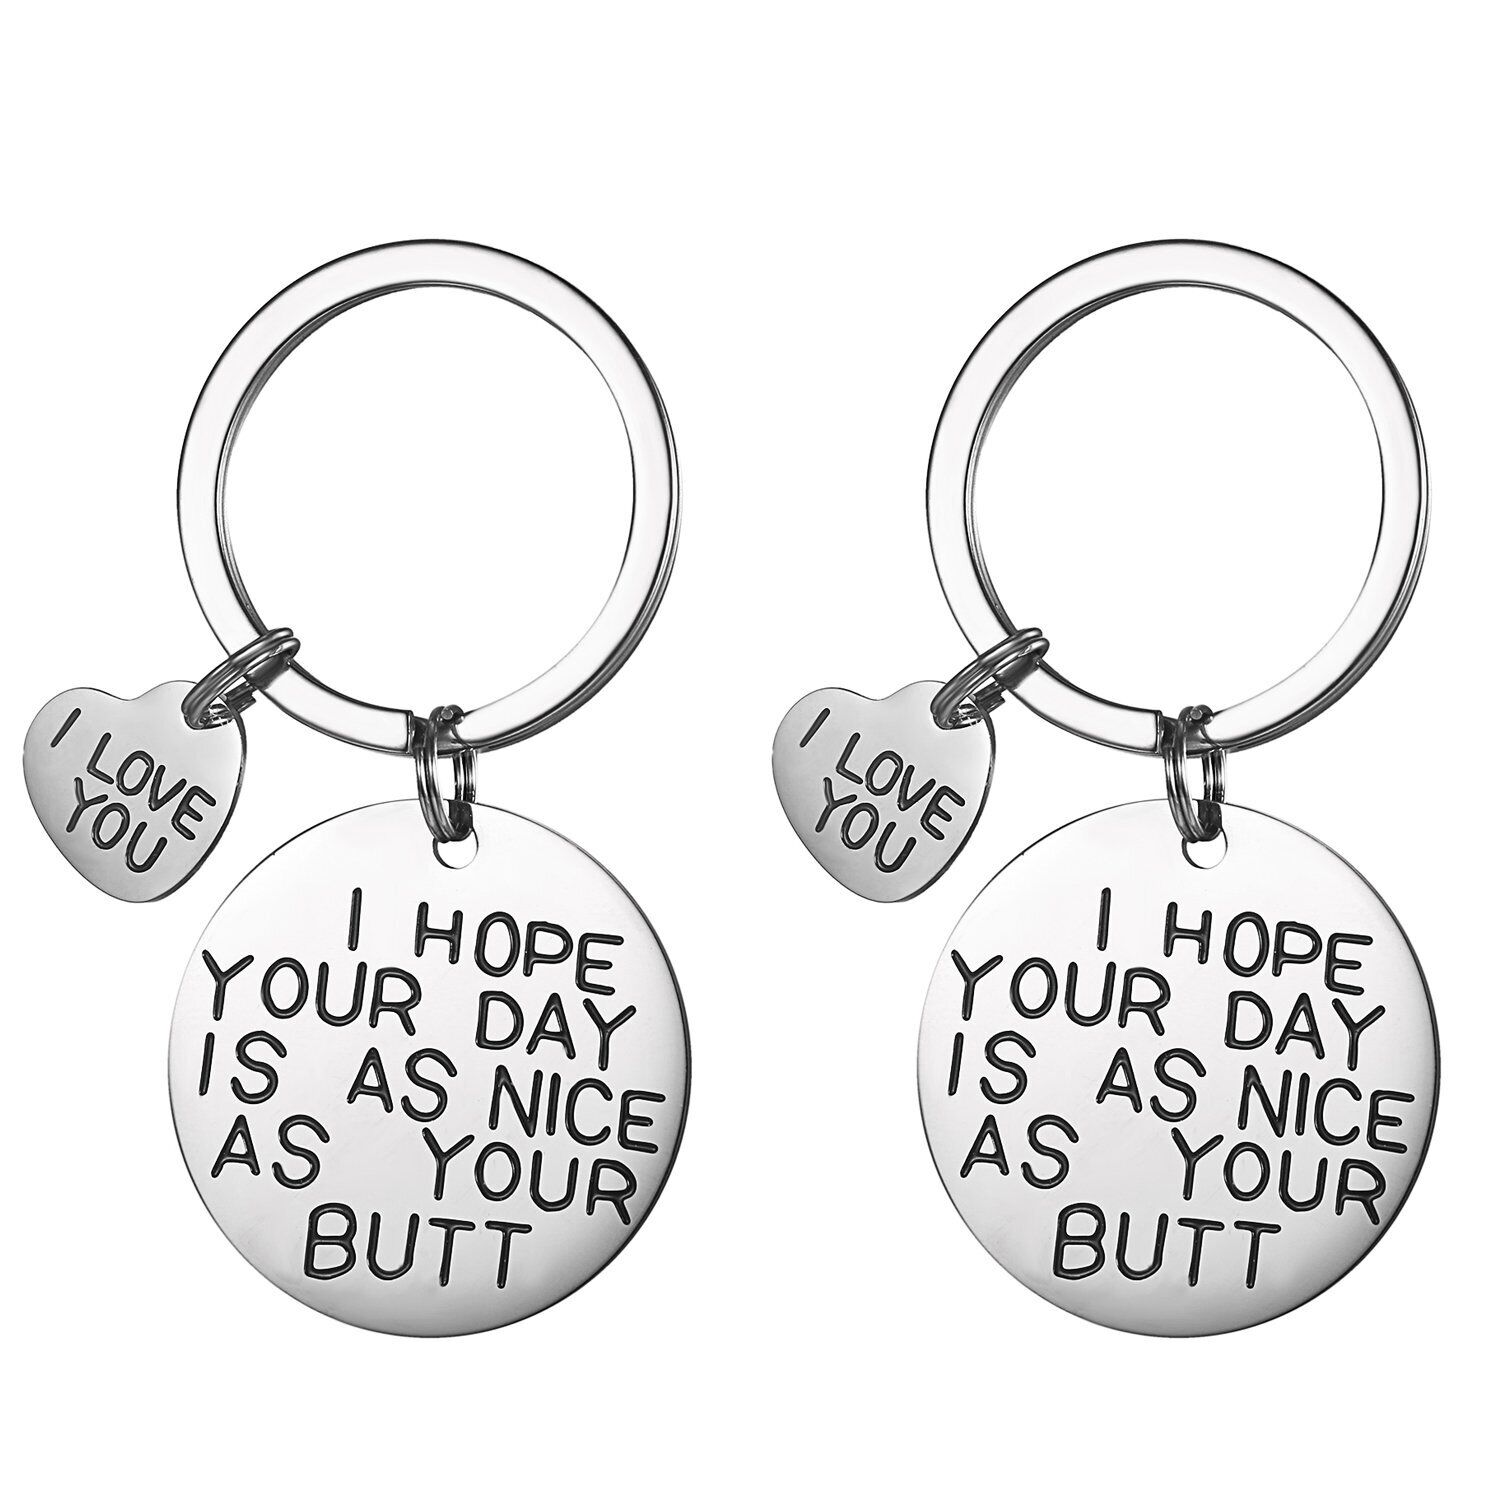 2 pcs Couple Keychain Keyring I Love You I Hope Your Day Is As Nice Aa Your Butt